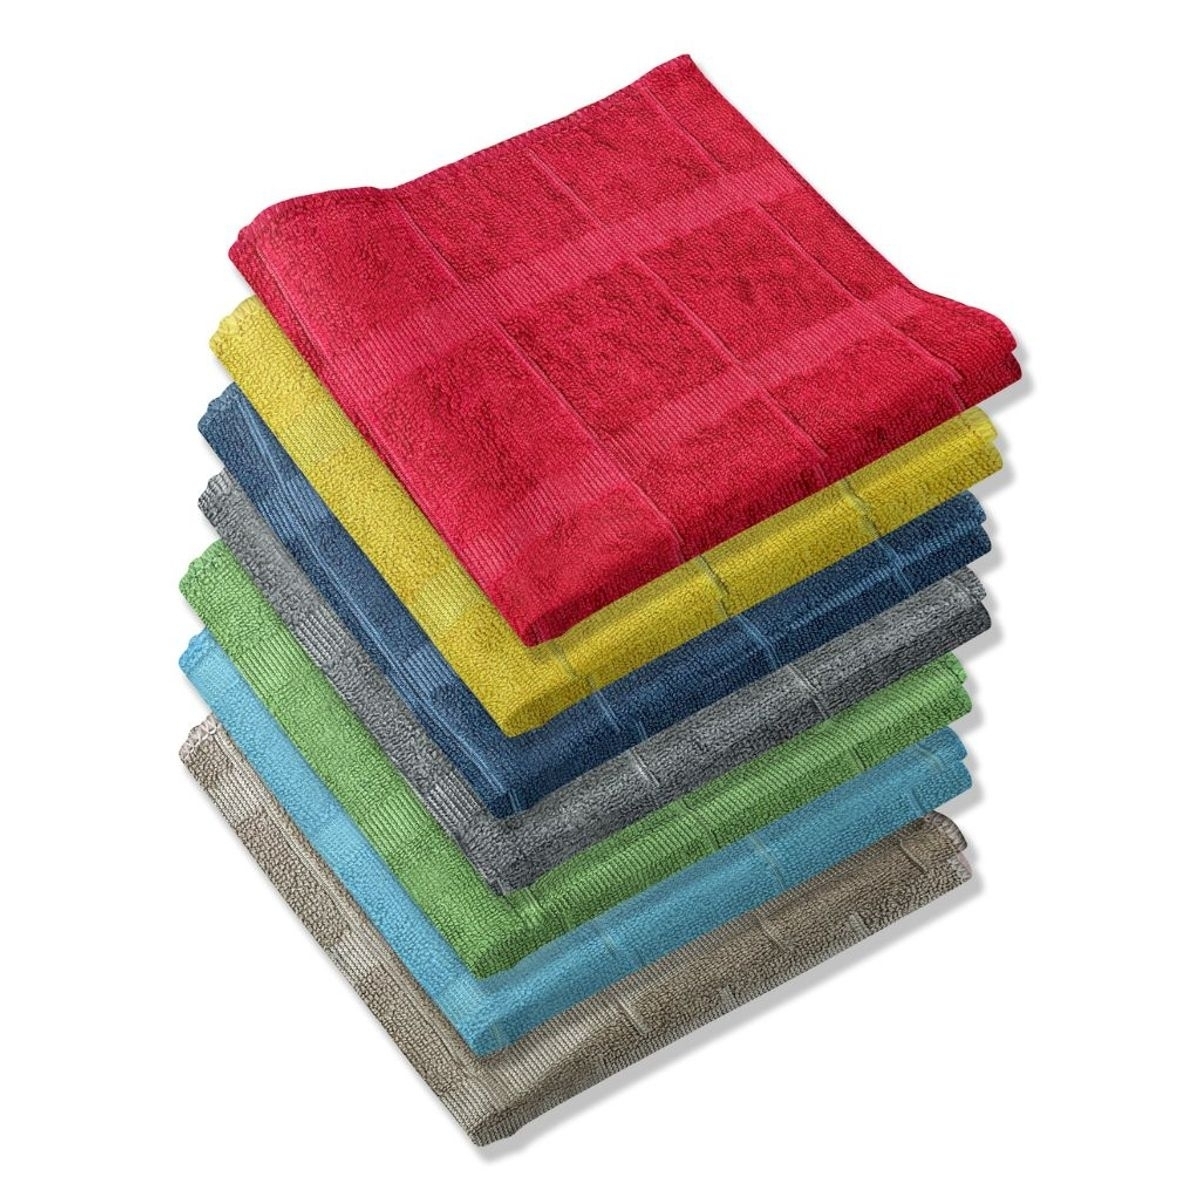 2-Pack: Ultra-Absorbent Multi Use Cleaning Super Soft Microfiber Dish Utility Rag Cloths - Red, Waffle